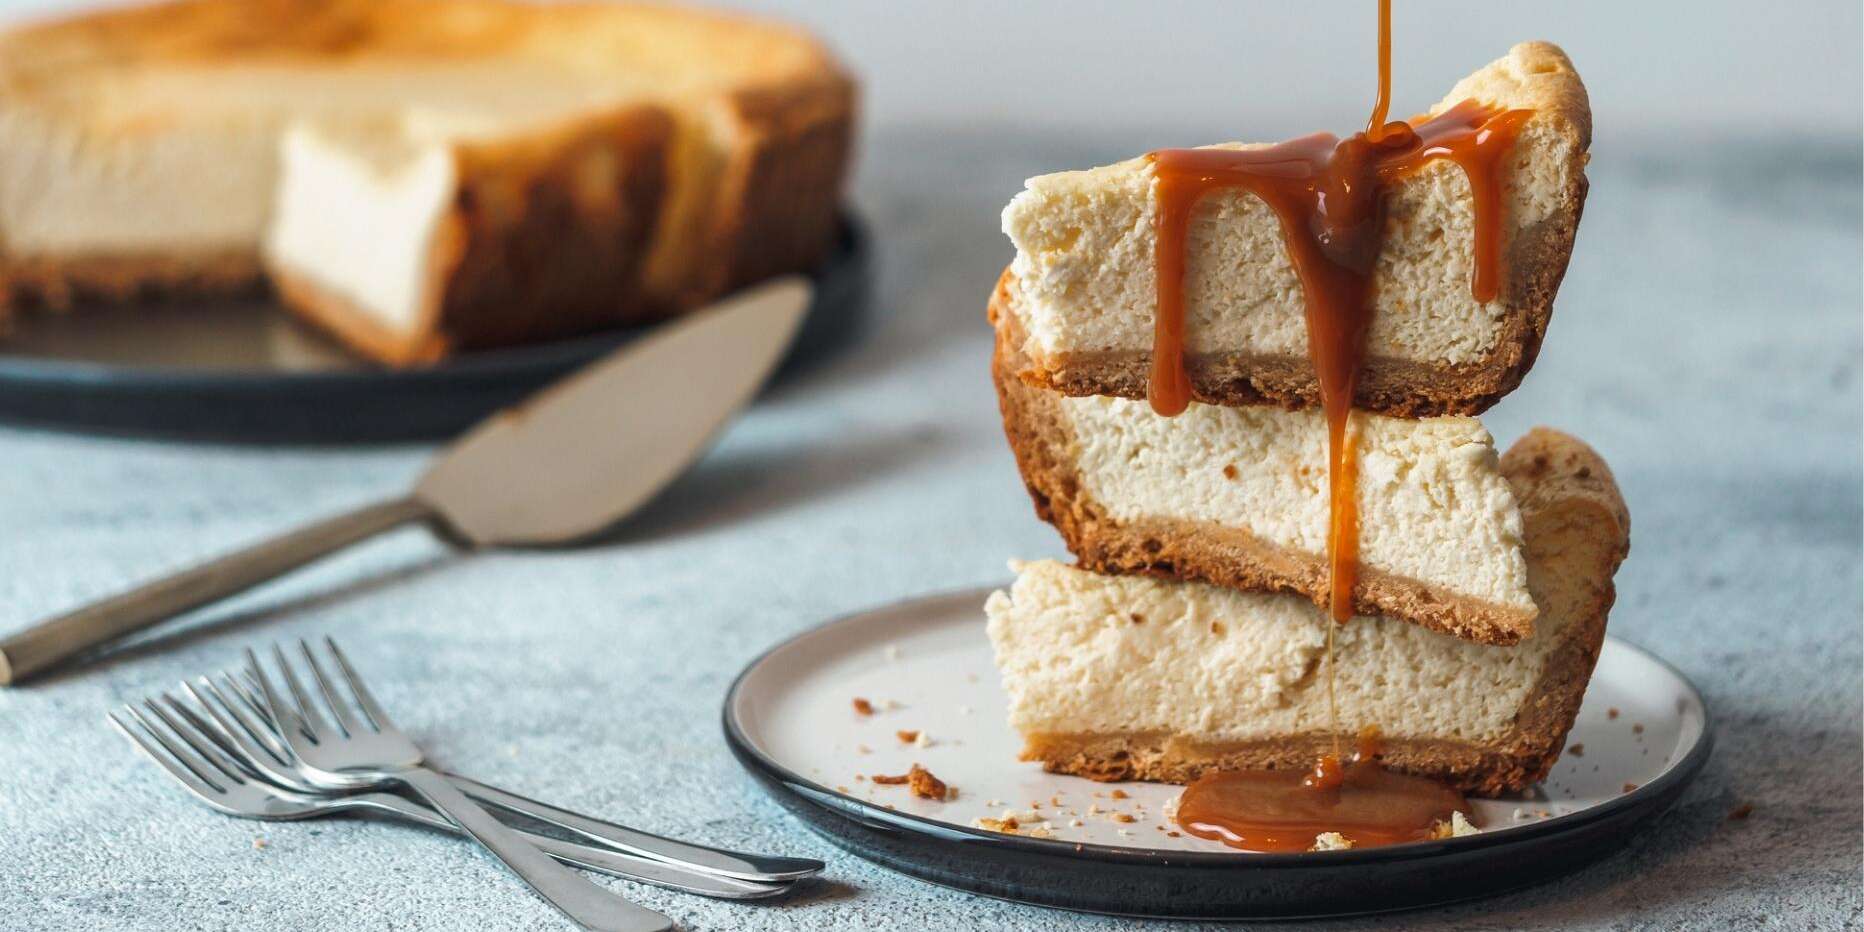 Licorice Caramel Sauce Is the New Best Dessert Topping | MyRecipes